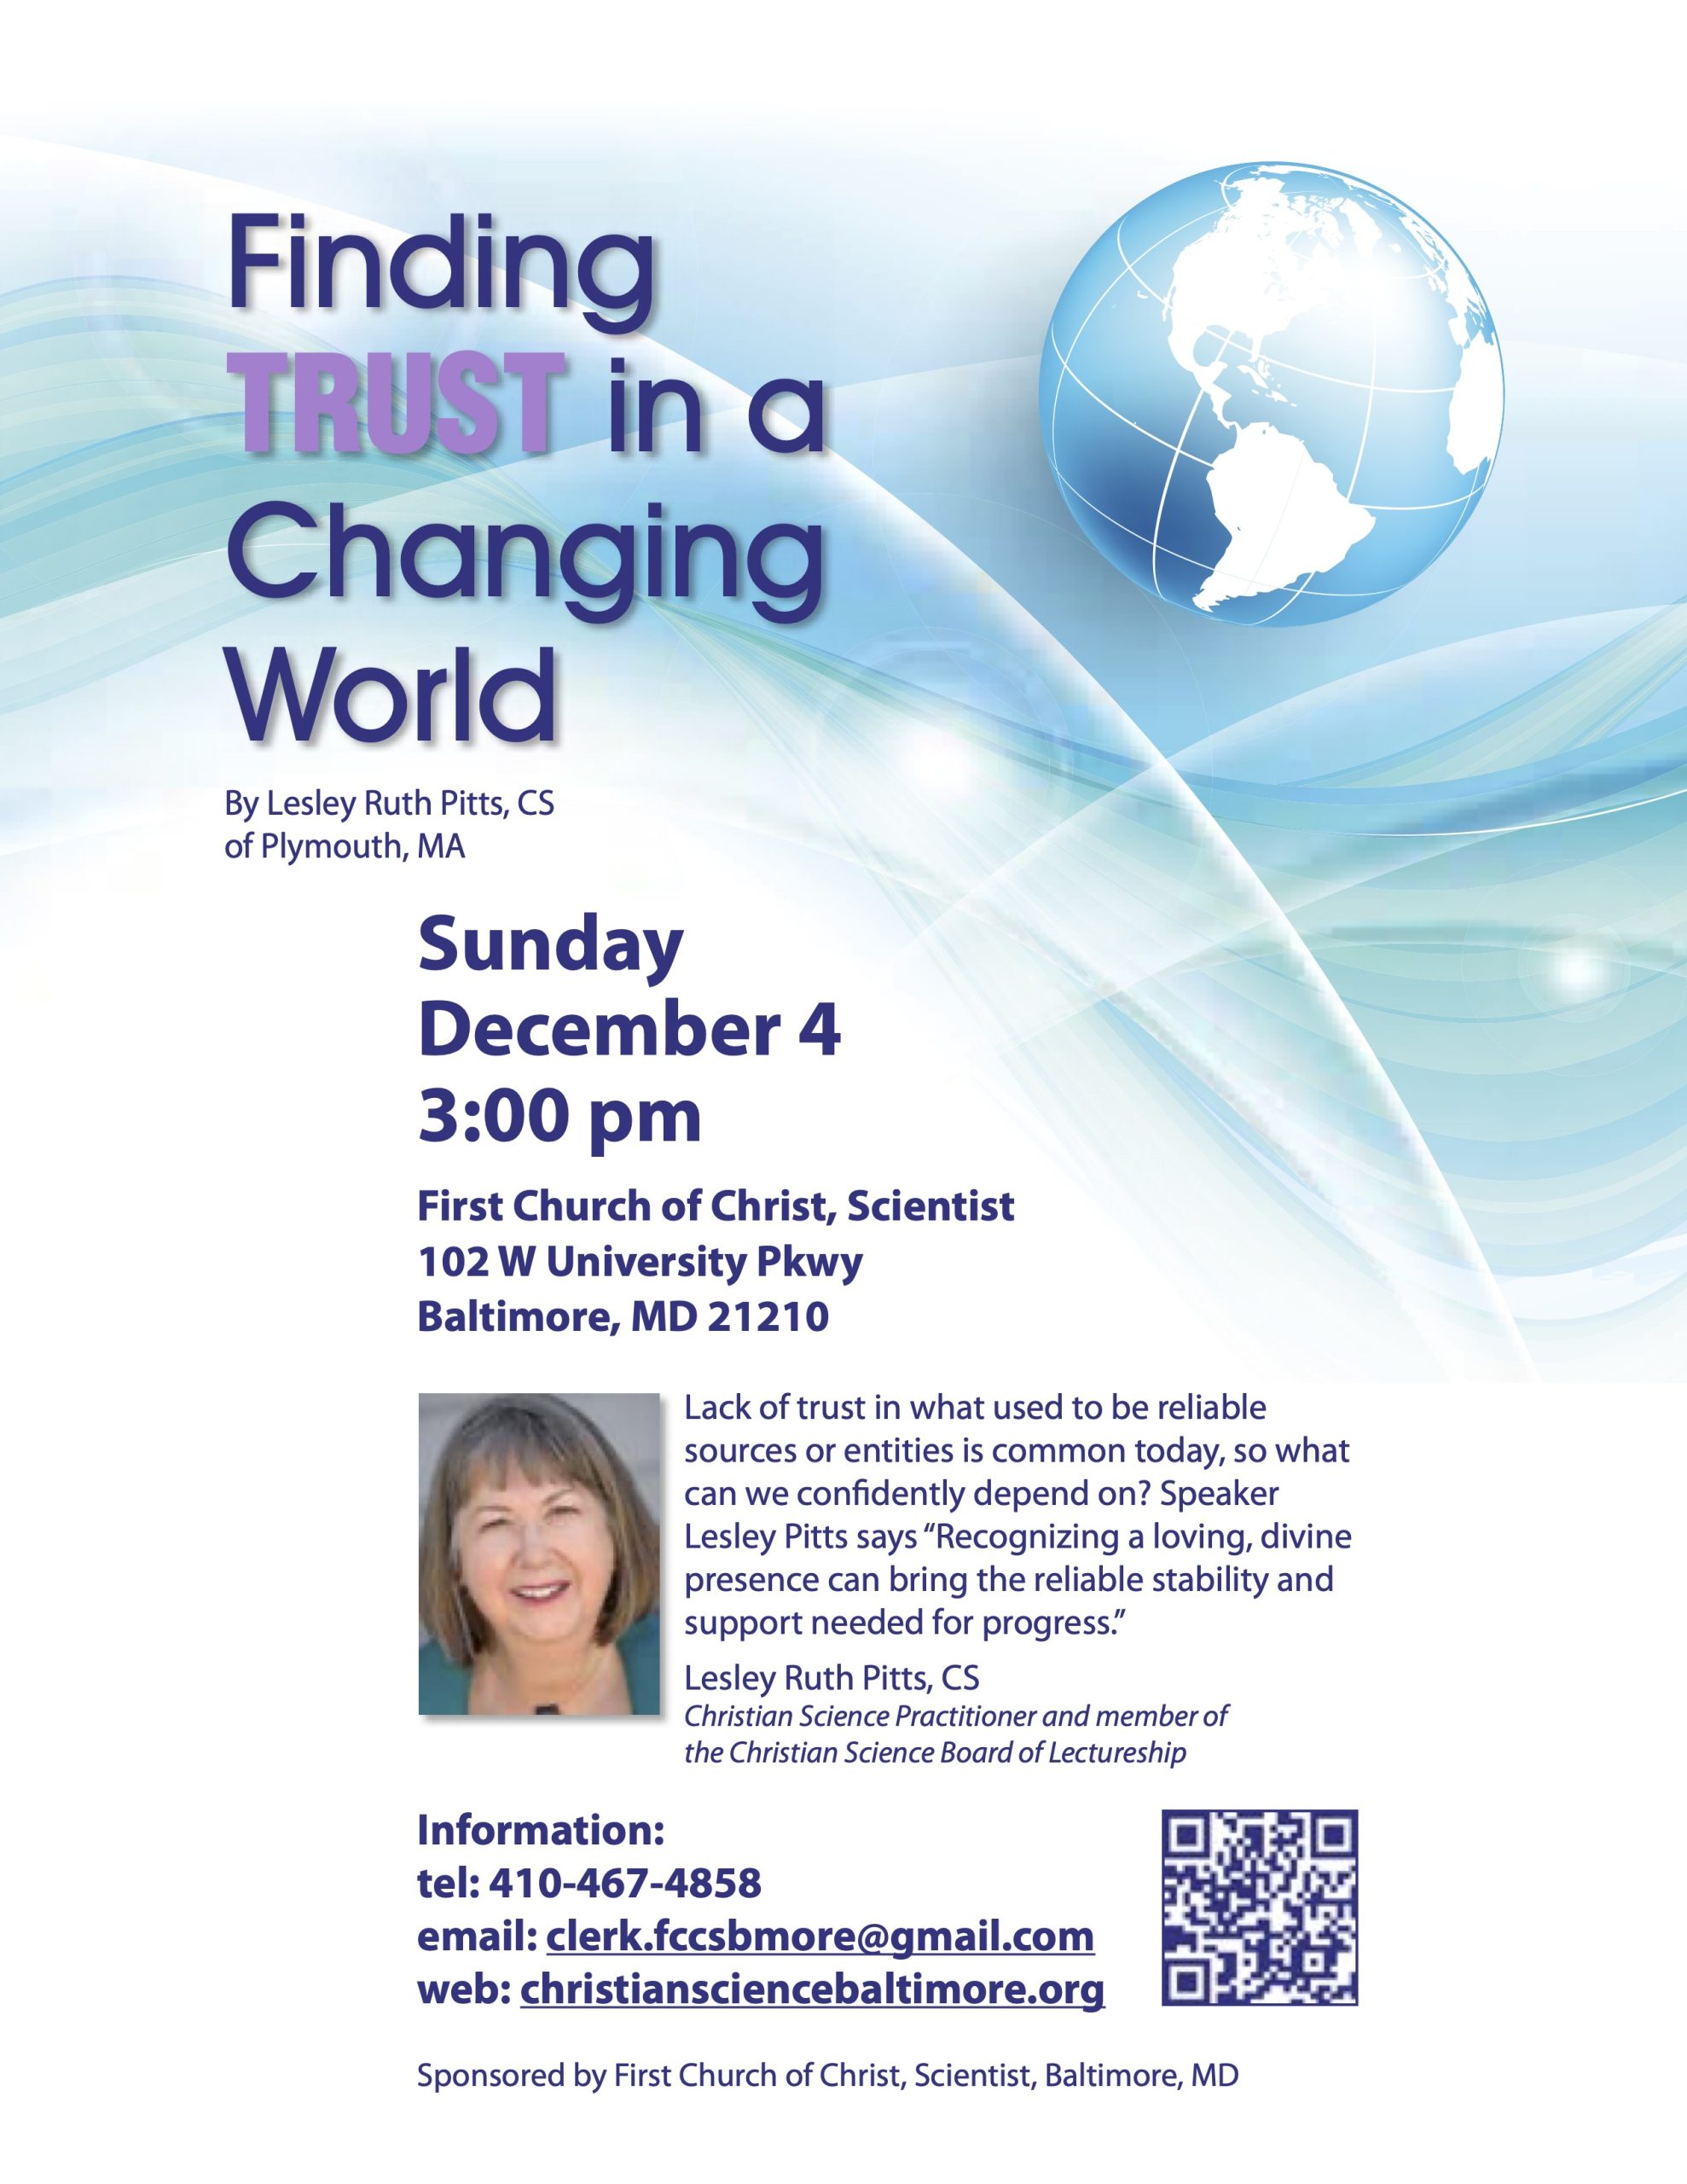 Christian Science Lecture – "Finding TRUST in a Changing World" by Lesley Ruth Pitts, CS @ First Church of Christ, Scientist Baltimore | Baltimore | Maryland | United States